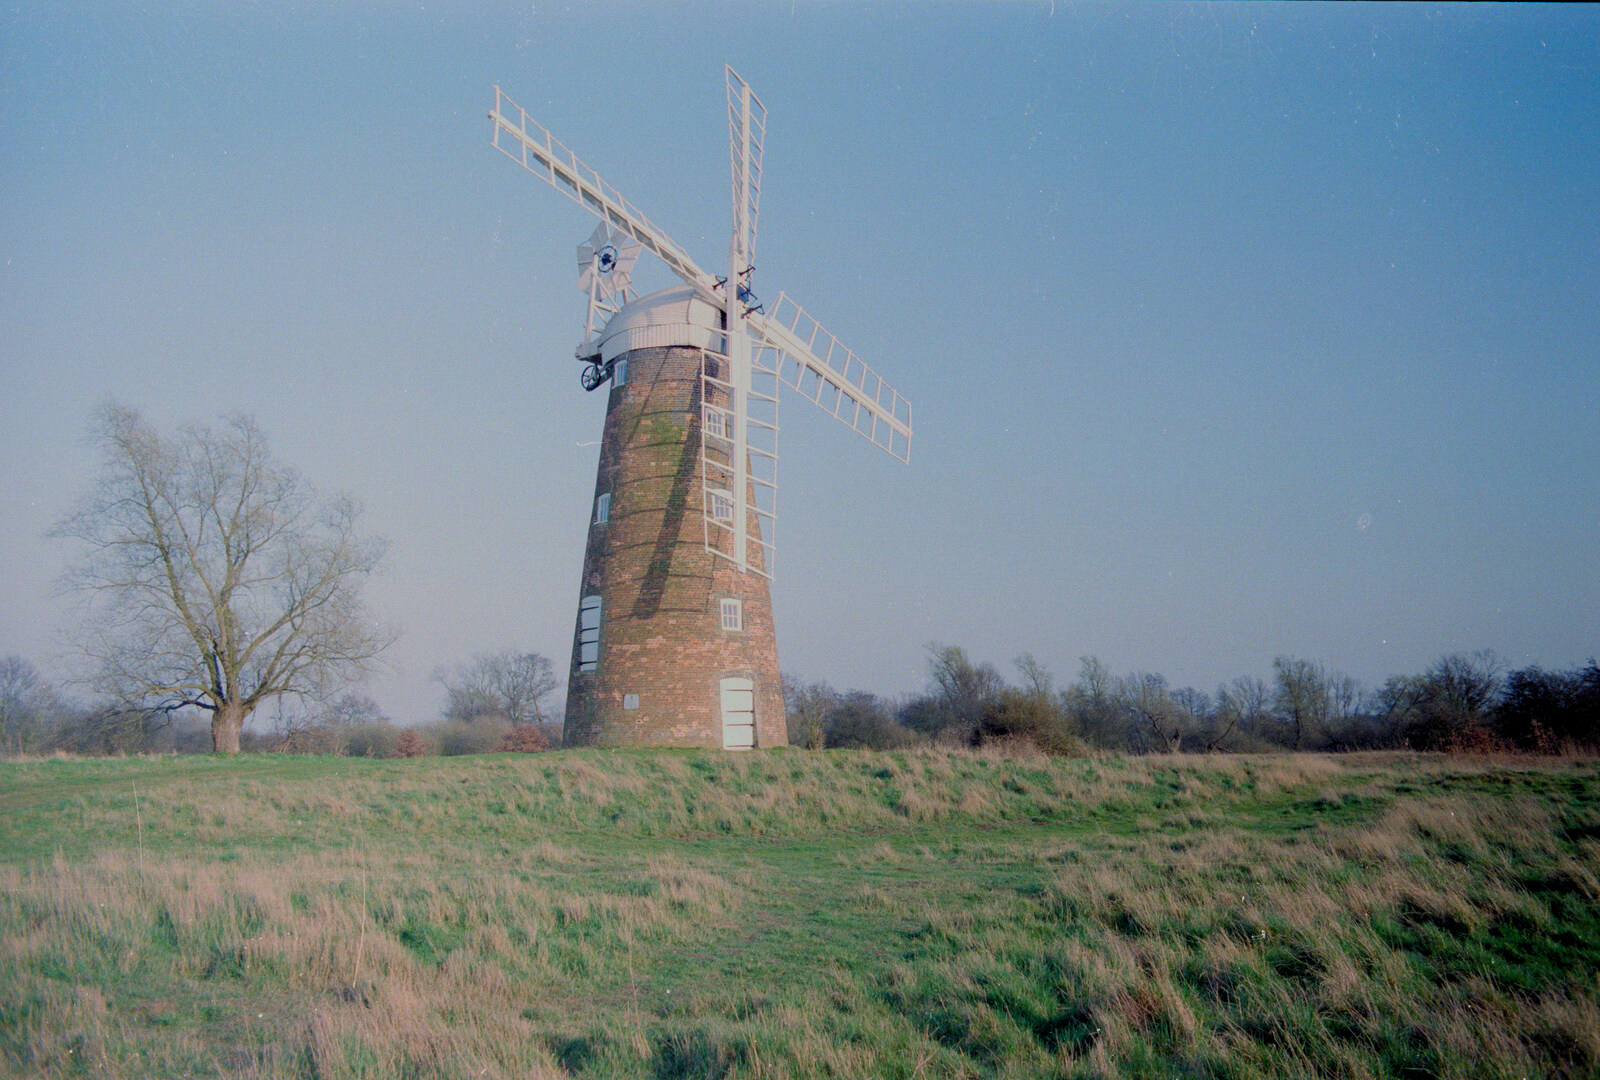 Billingford windmill from Pedros and Daffodils, Norwich and Billingford, Norfolk - 20th April 1991